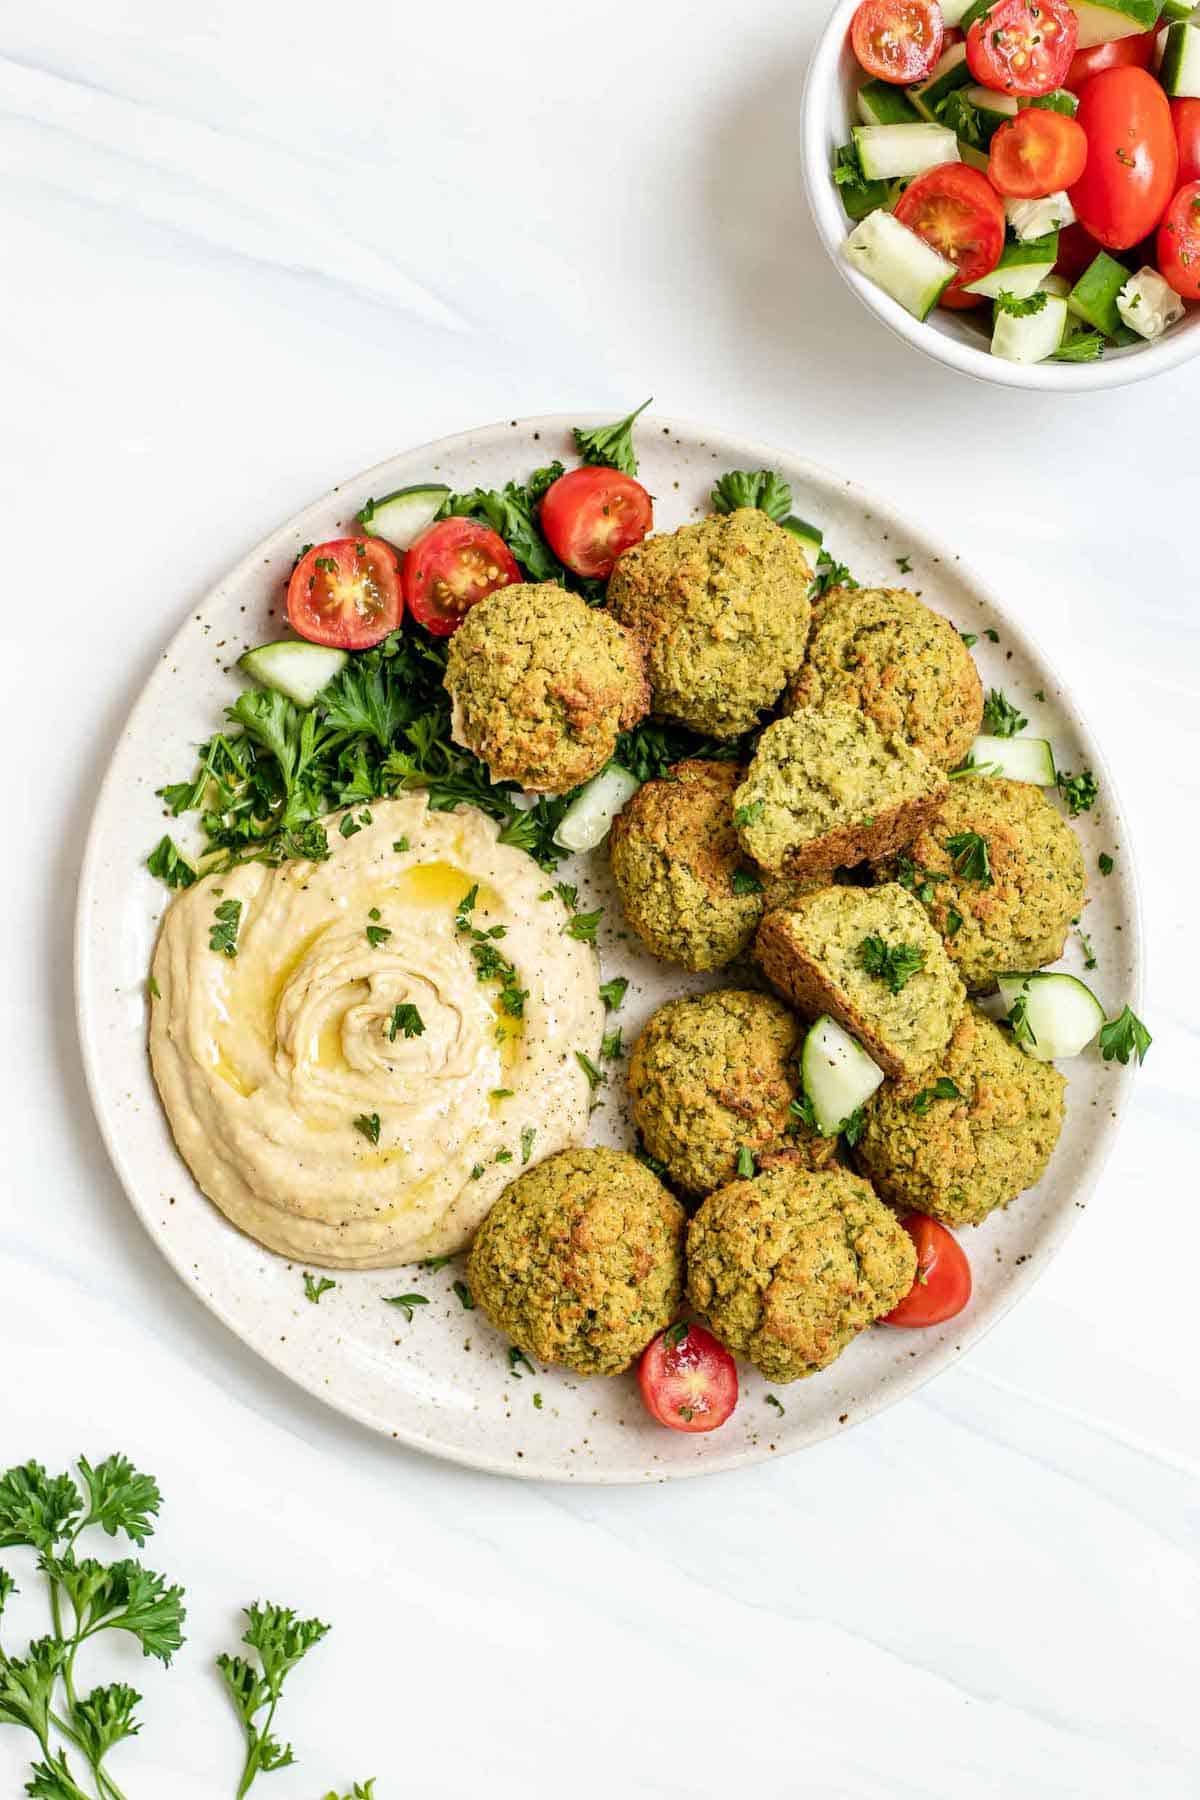 Plate with baked falafel, hummus, cucumber and tomatoes.